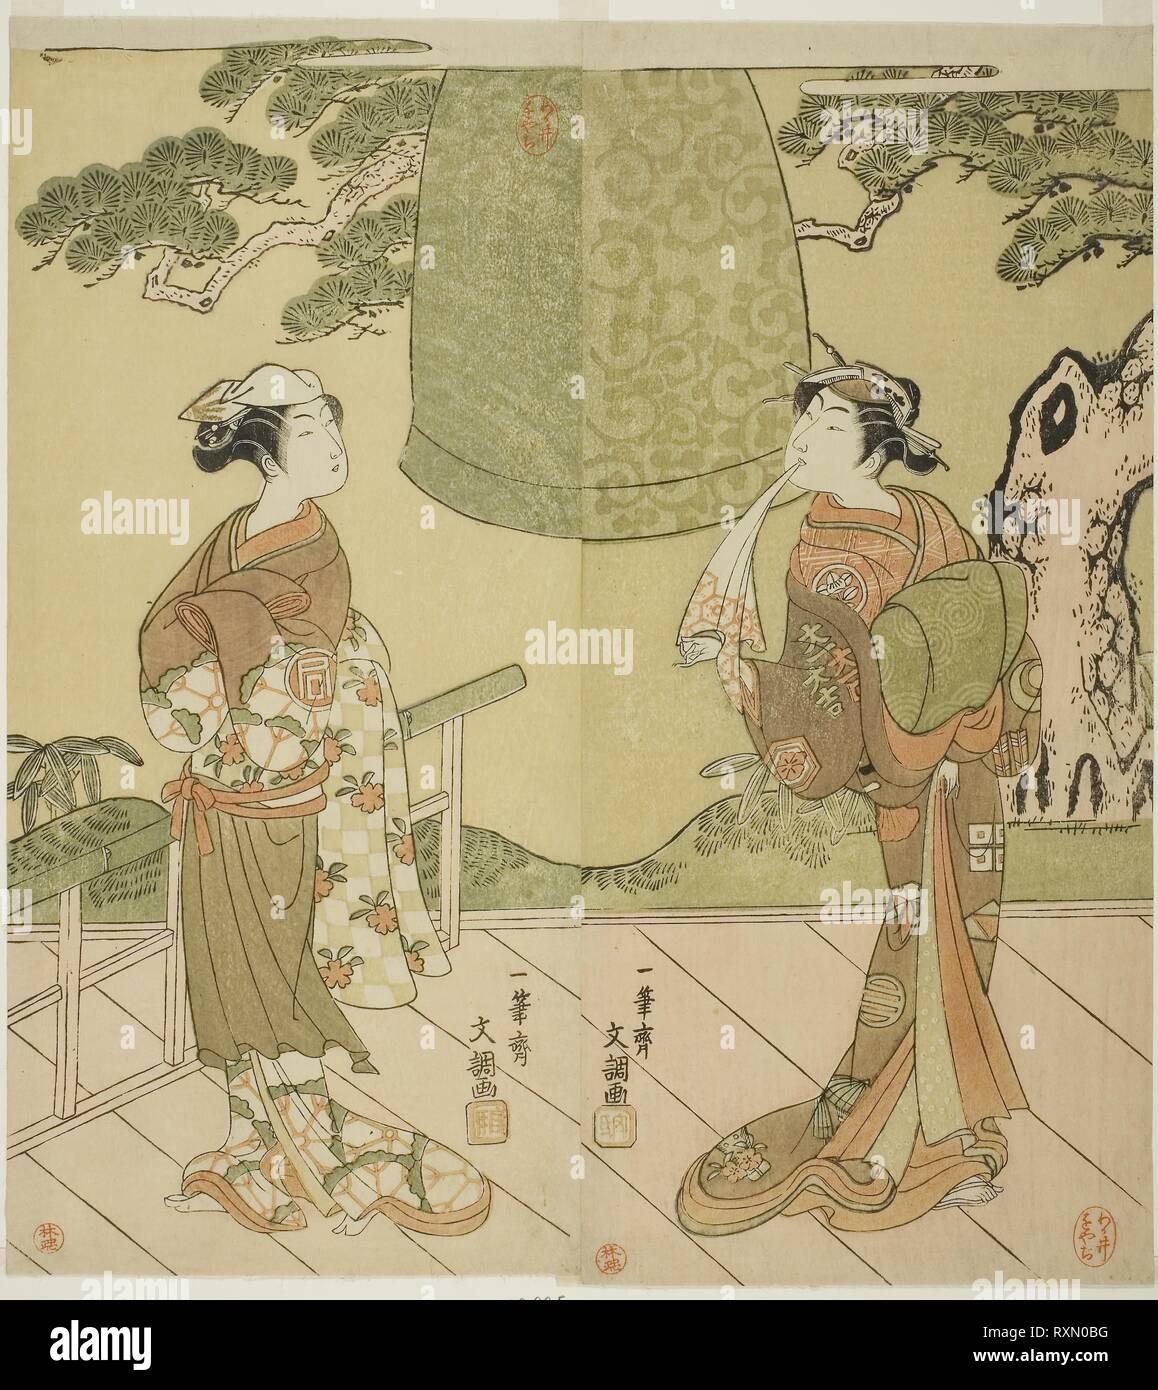 The Actors Ichimura Uzaemon IX as Shume no Hangan Morihisa (right), and Sanogawa Ichimatsu II as Chujo (left), in the Play Edo no Hana Wakayagi Soga, Performed at the Ichimura Theater in the Second Month, 1769. Ippitsusai Buncho; Japanese, active c. 1755-90. Date: 1764-1774. Dimensions: 31.5 x 14.3 cm (12 3/8 x 5 5/8 in.) (right); 31.3 x 14.2 cm (12 5/16 x 5 9/16 in.) (left). Color woodblock print; hosoban; center and left sheets of triptych. Origin: Japan. Museum: The Chicago Art Institute. Stock Photo